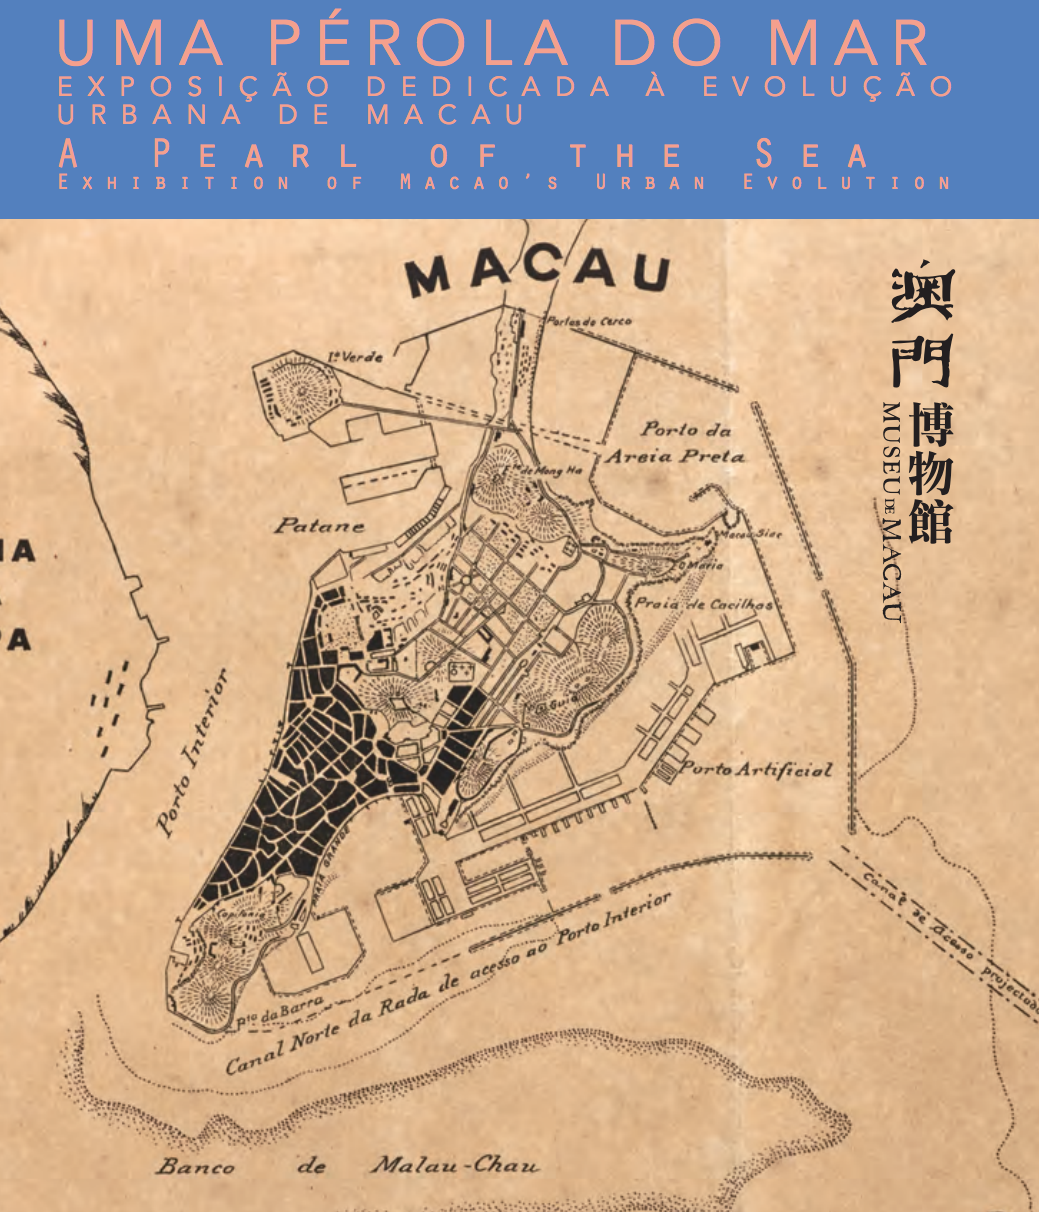 A Pearl of the Sea — Exhibition of Macaos Urban Evolution family events macau january